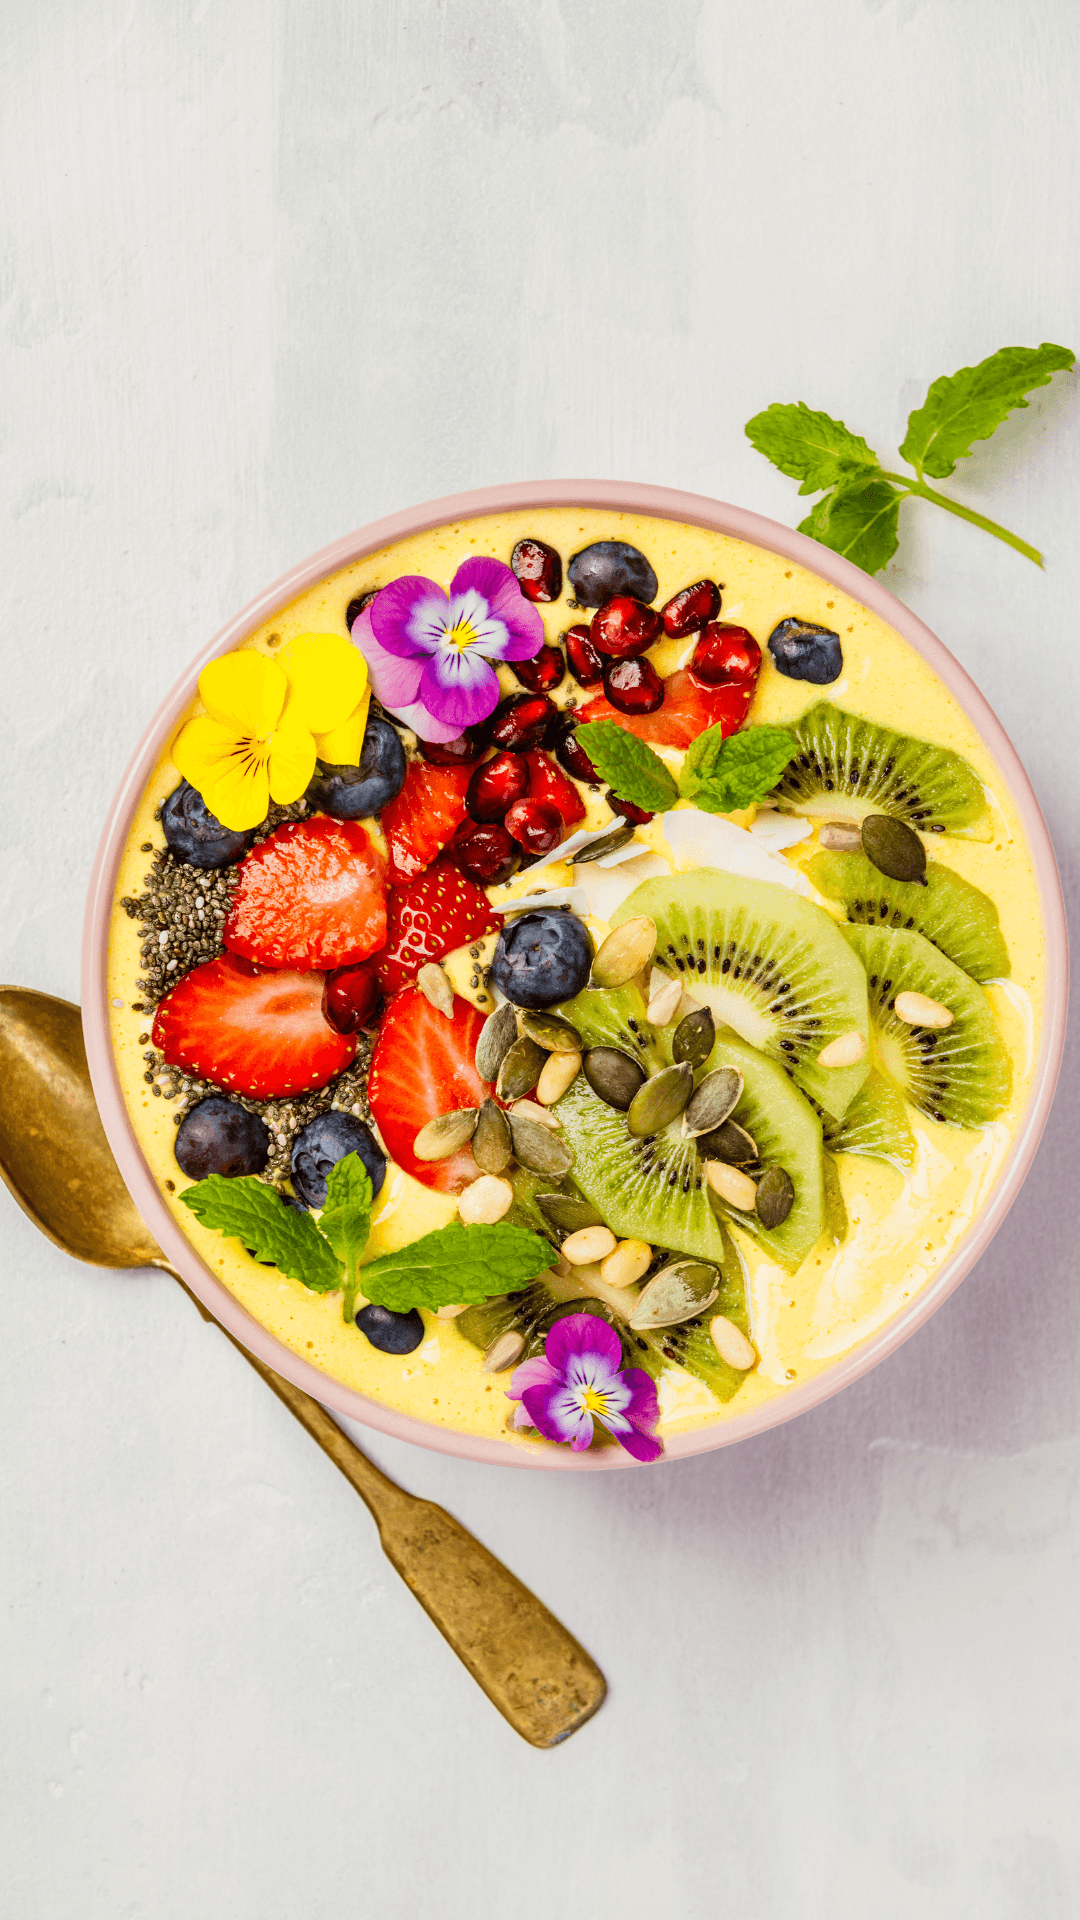 A colorful array of delicious fresh fruits